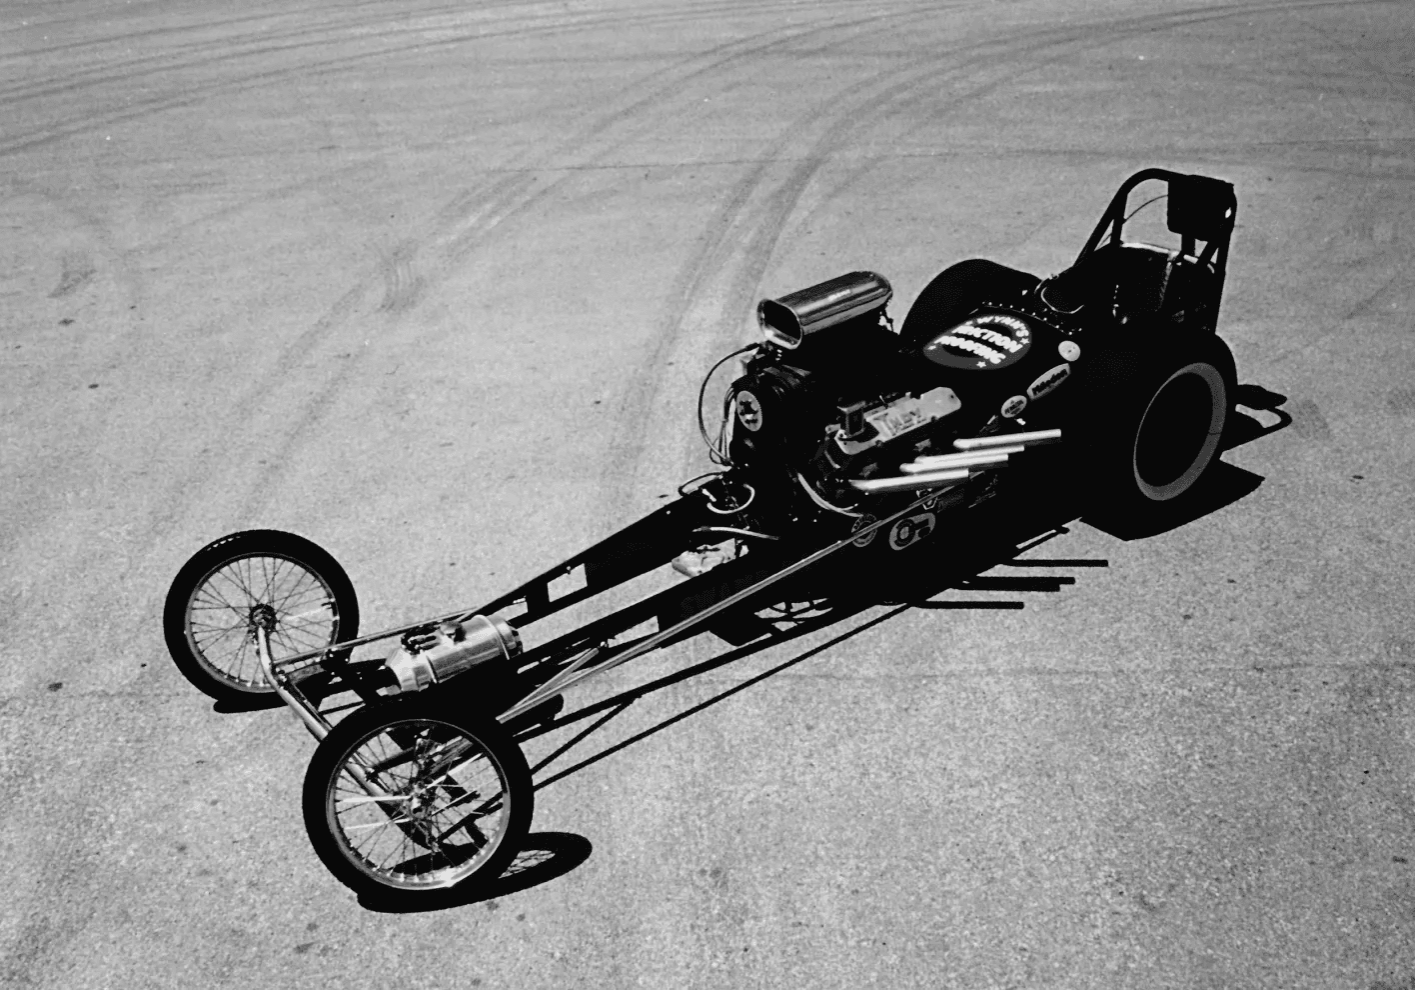 Don Garlits built Swamp Rat IV to race at the US Nationals in 1962. Due to the NHRA fuel ban of nitromethane, the car would run on gasoline and be powered by a Dodge 413 CID Max-Wedge. It was at this very event that the nickname “Big Daddy” was first used. Don was runner-upper to Jack Chrisman for the Overall Top Eliminator title.